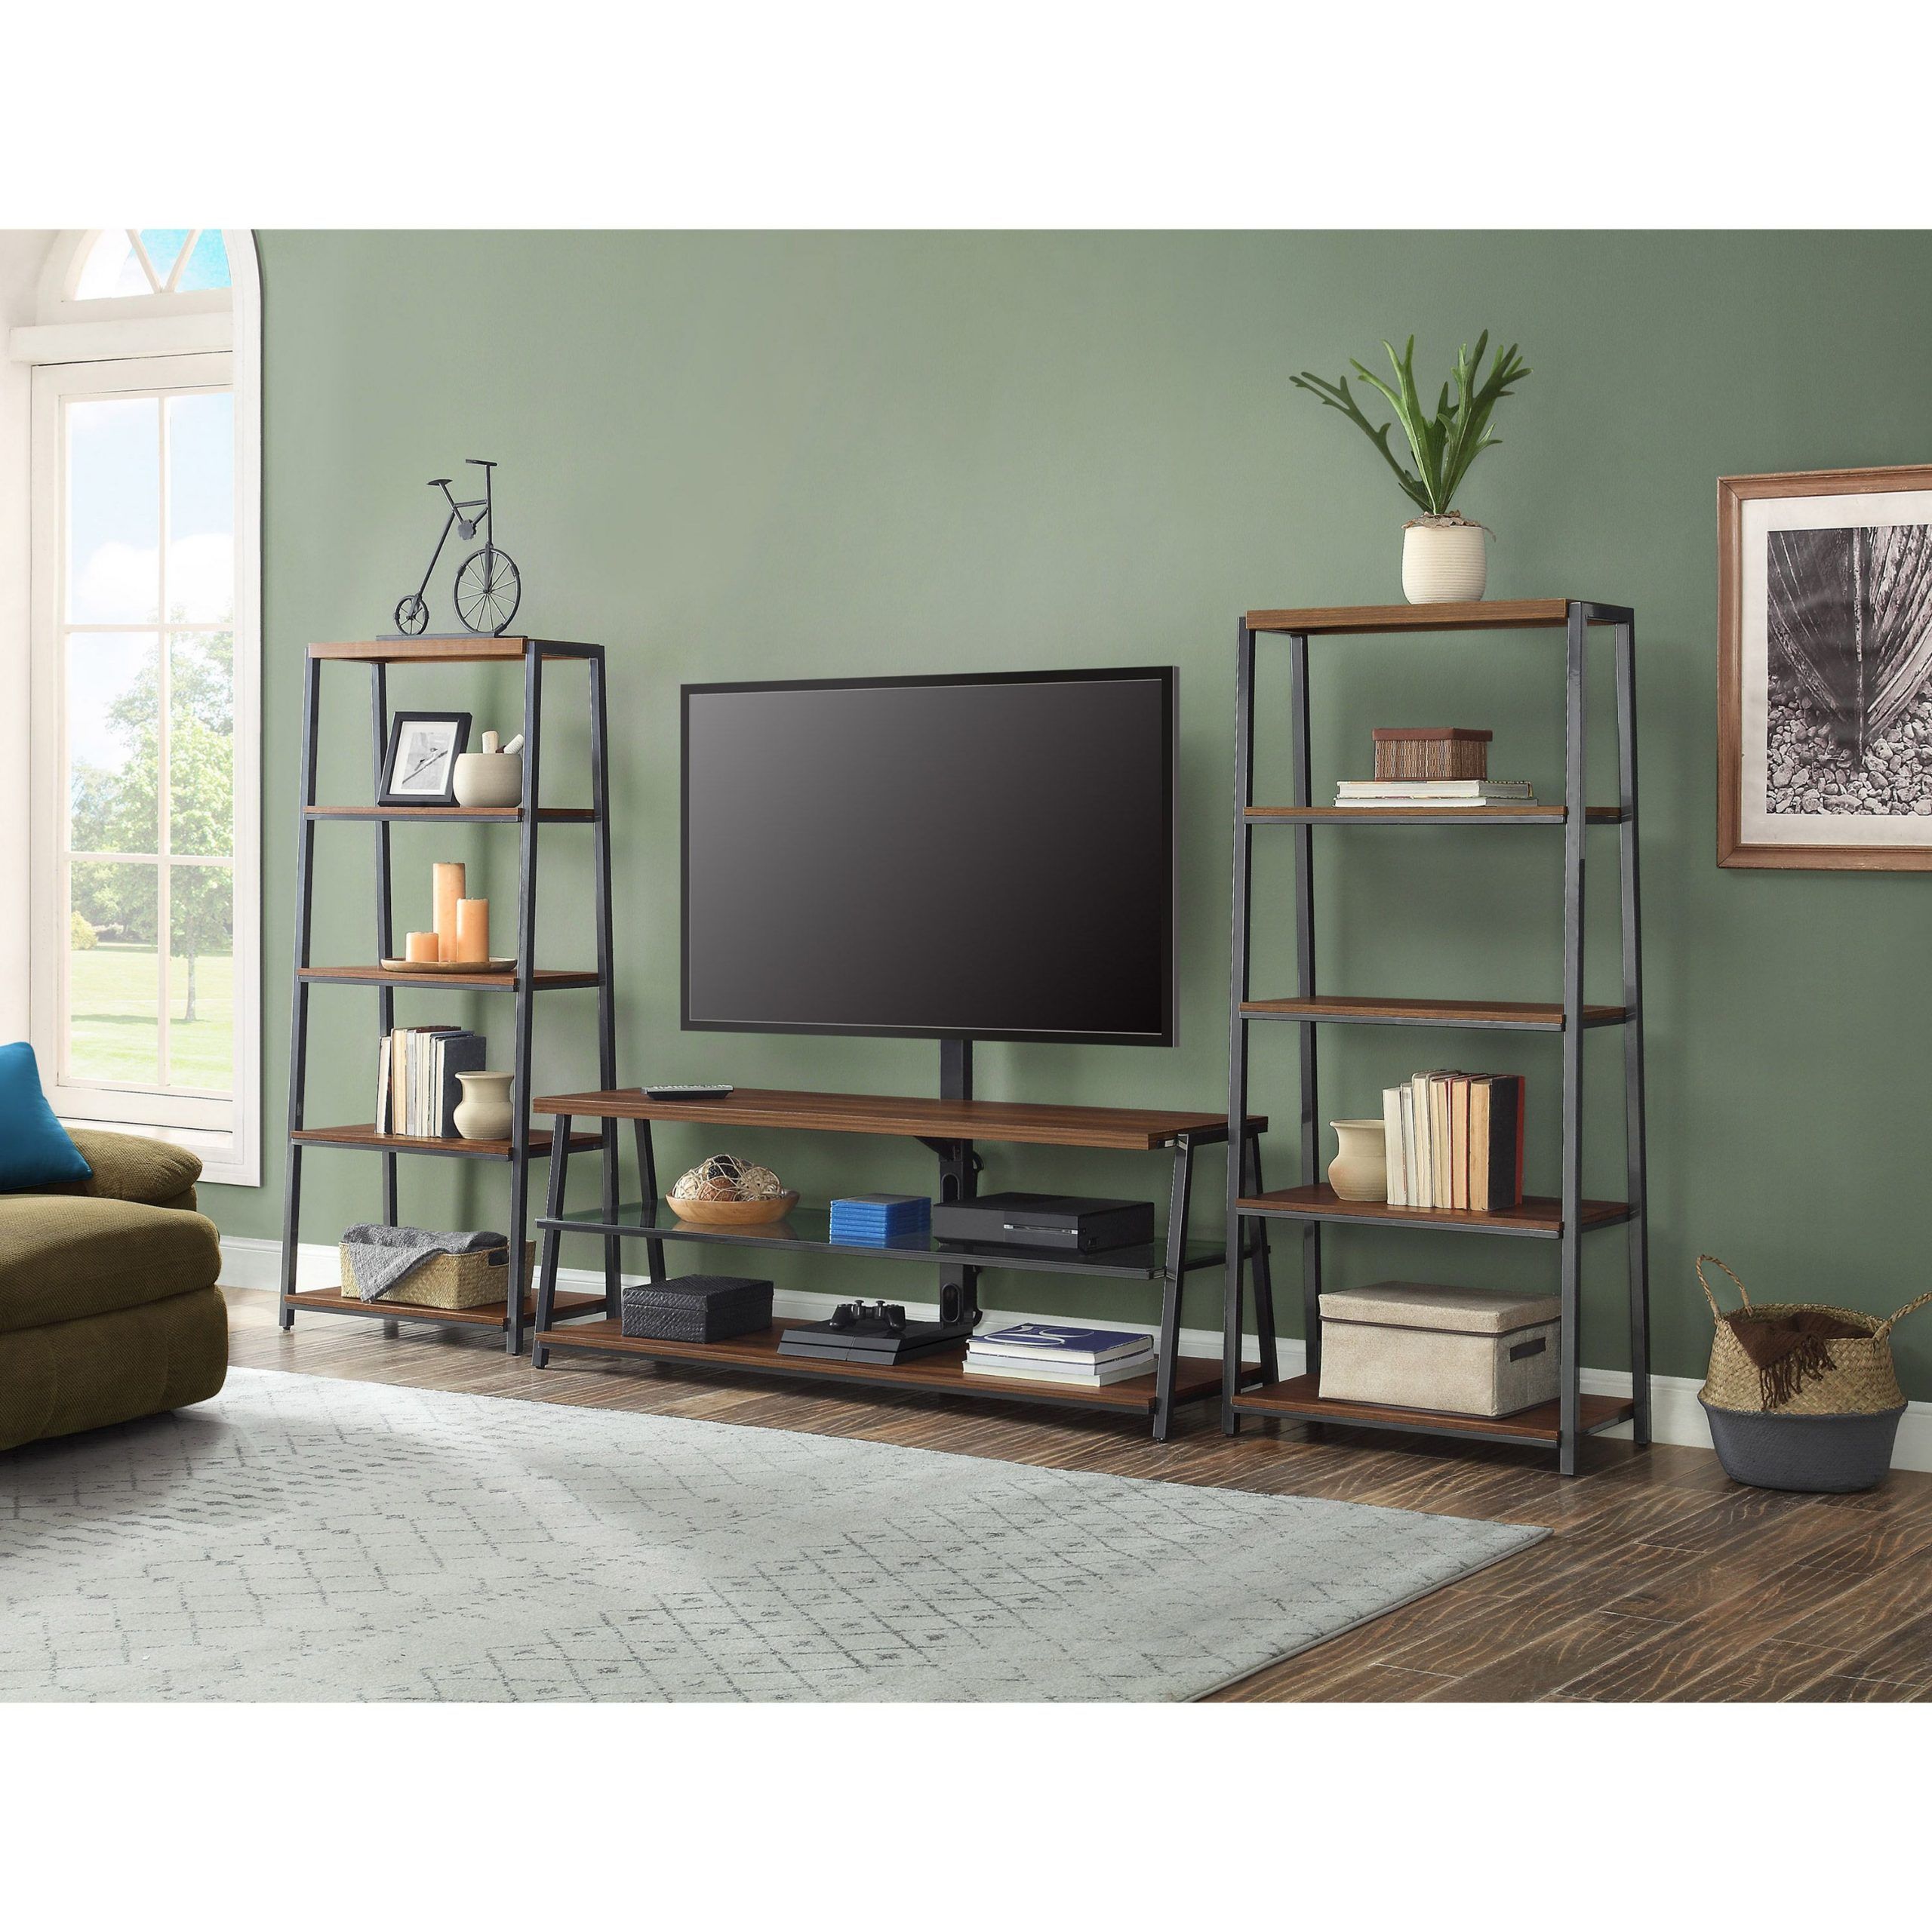 Buy Mainstays Arris 3 In 1 Tv Stand Tv Stand And (2) 4 Intended For Mainstays Arris 3 In 1 Tv Stands In Canyon Walnut Finish (Gallery 9 of 20)